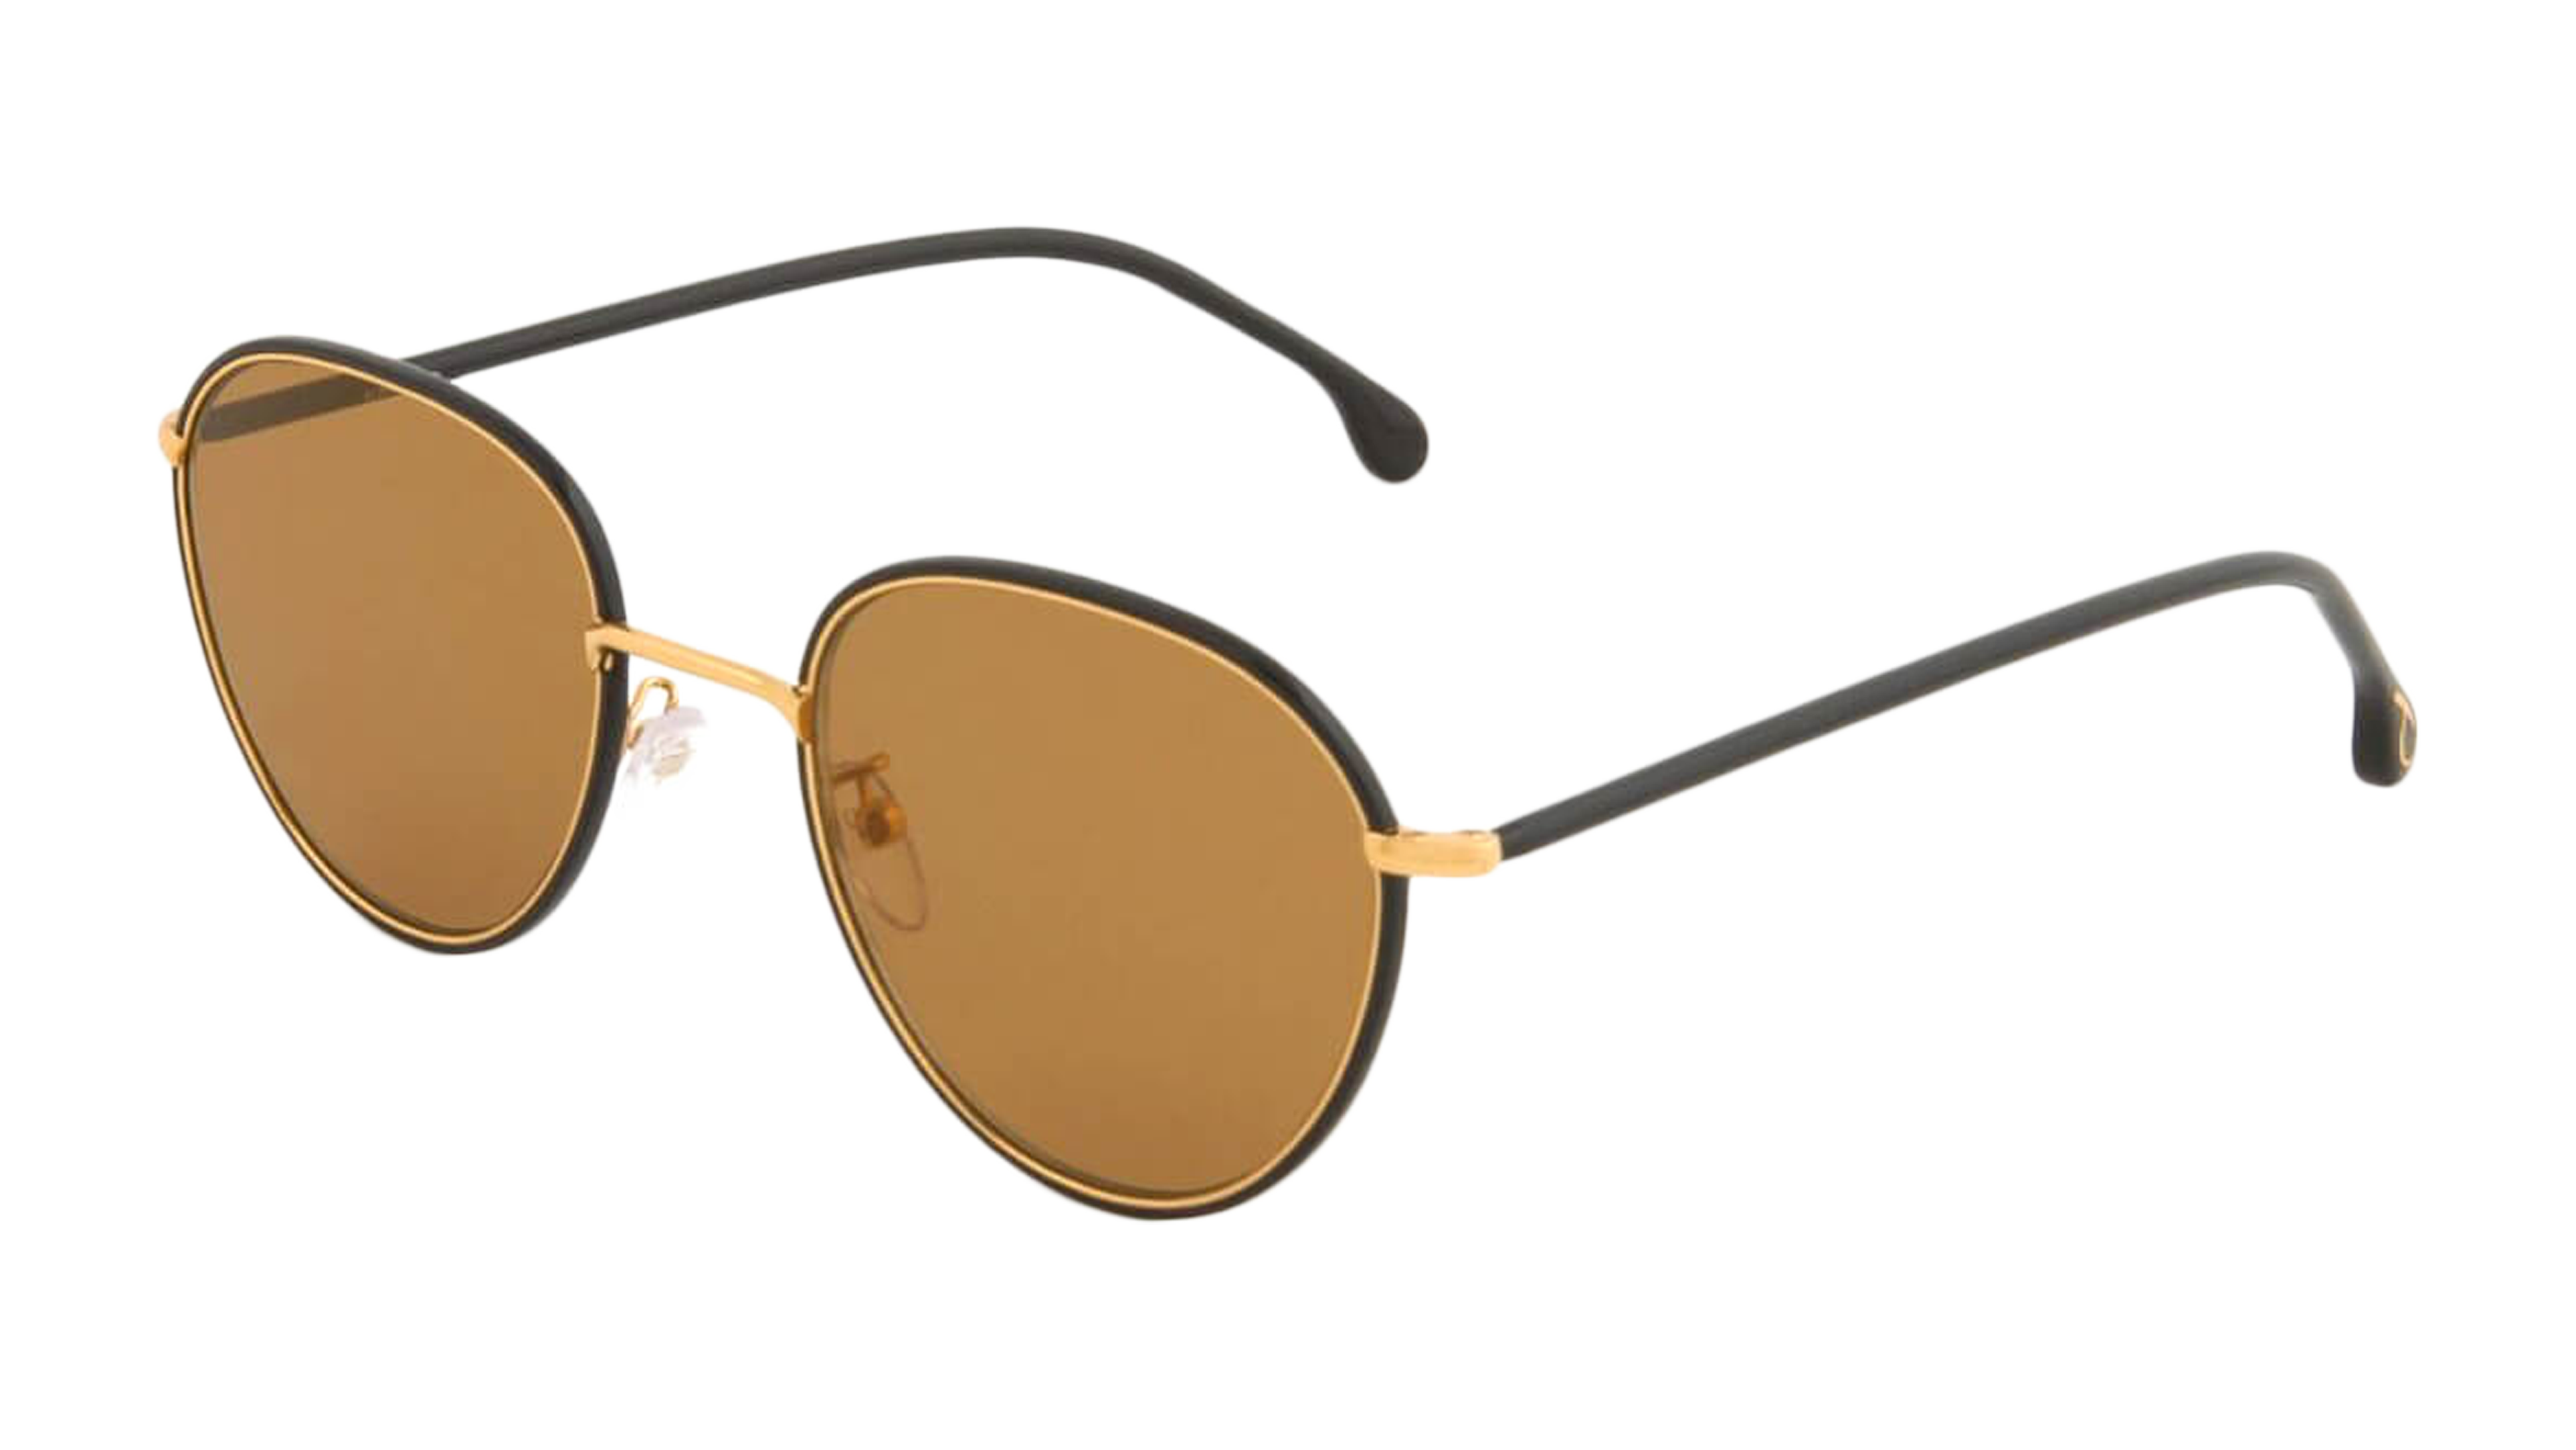 Angle_Left01 Paul Smith Albion PS SP003V2 (001) Sunglasses Brown / Black